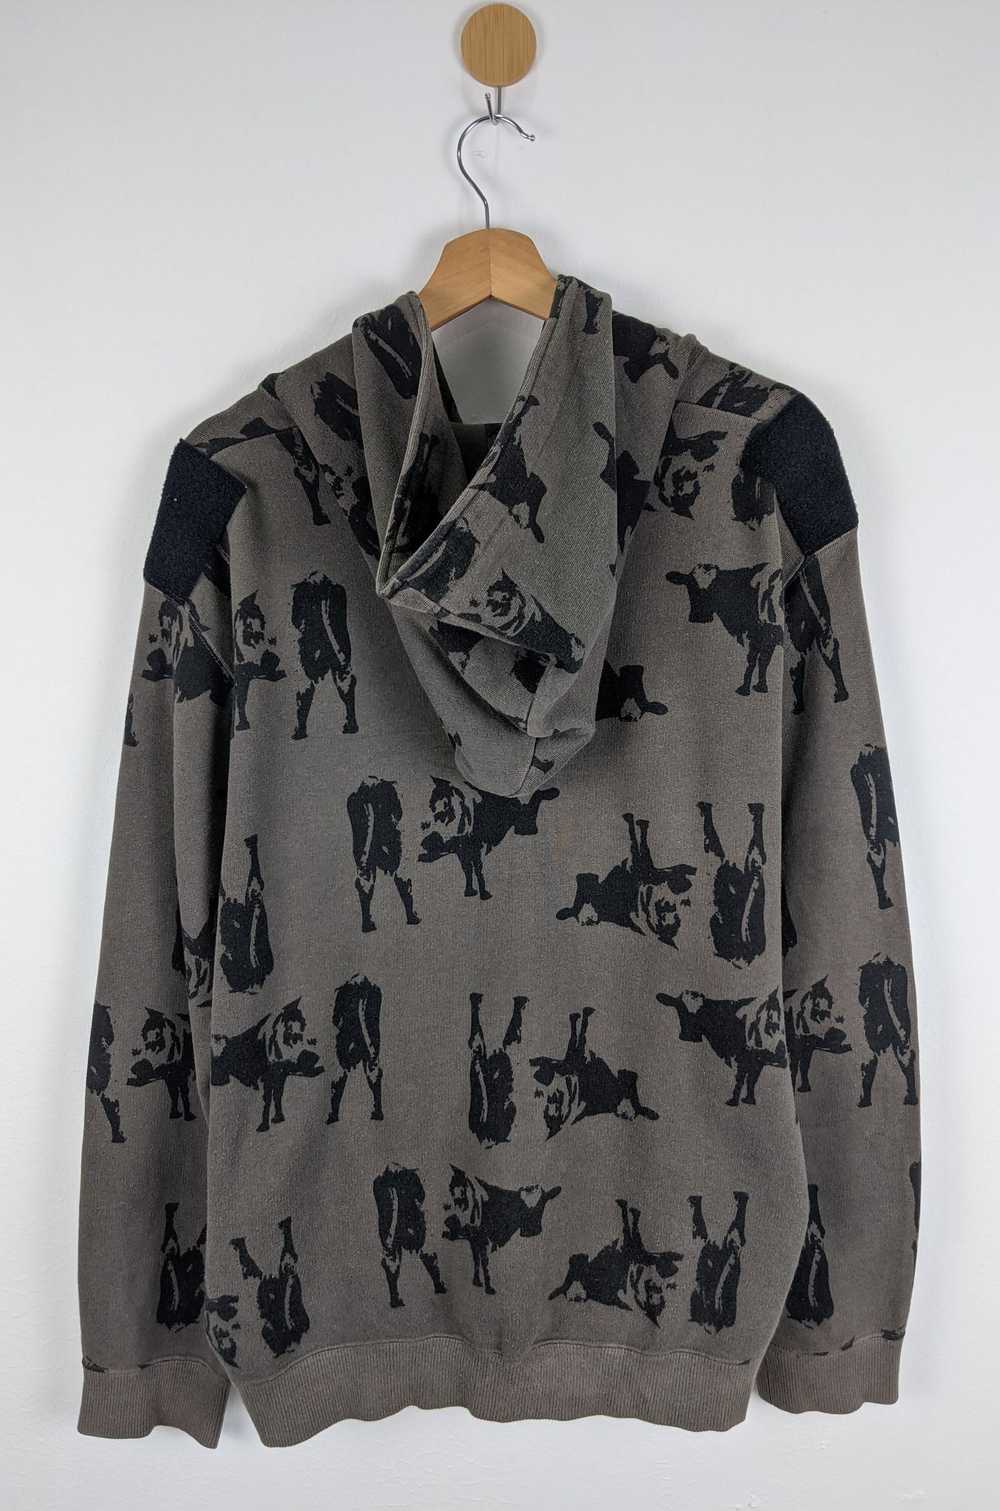 Undercover Undercover Cow Print Hoodie Sweater - image 2